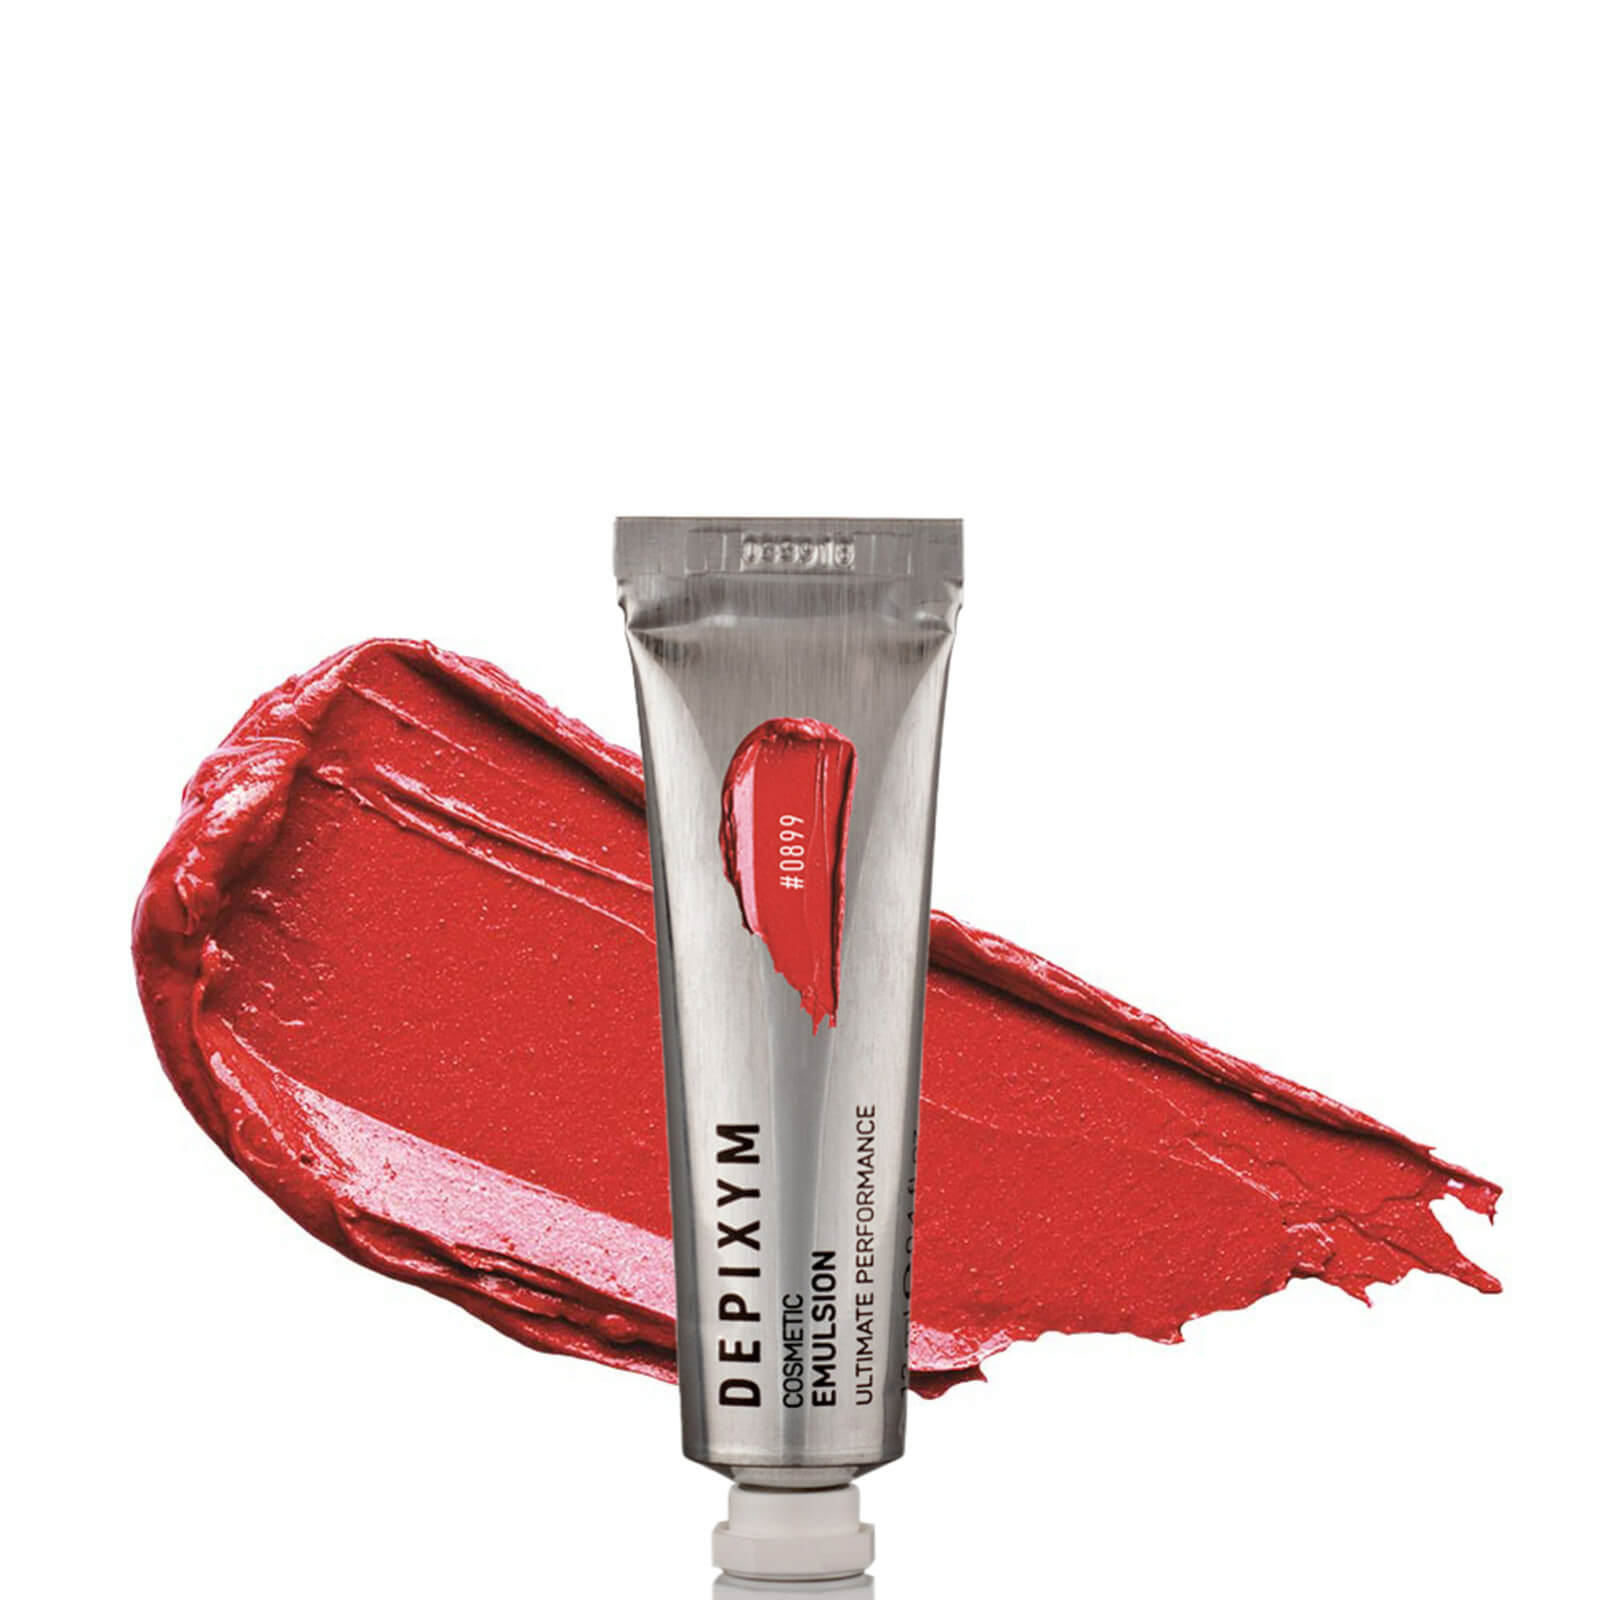 DEPIXYM Cosmetic Emulsion 12ml (Various Shades) - #0899 Pinky Red